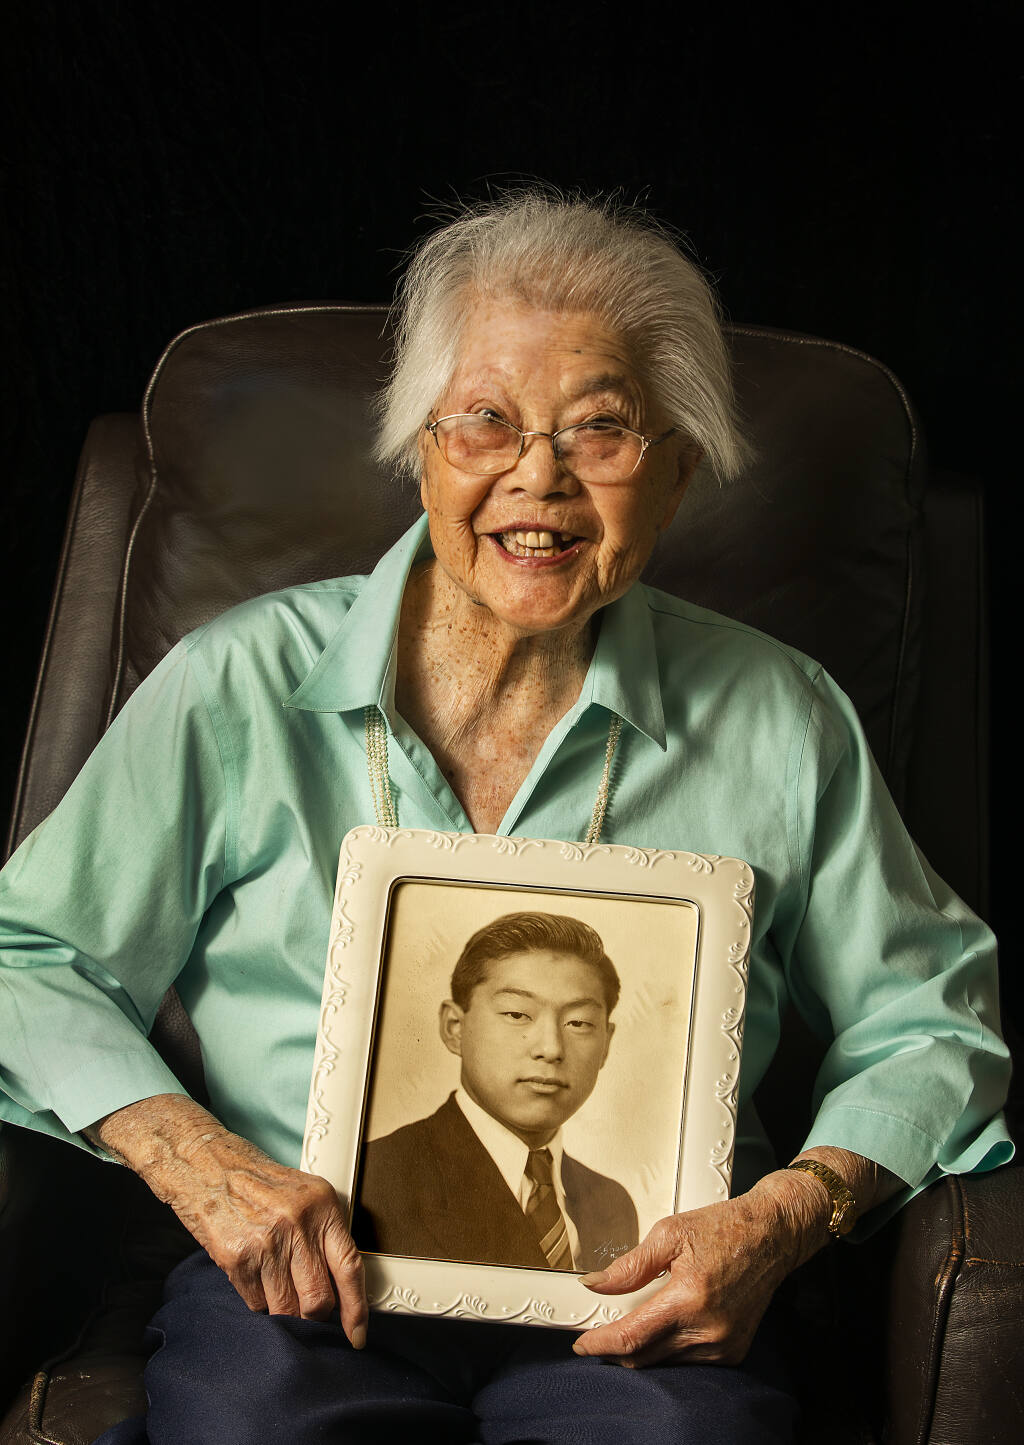 Anne Ohki, 97, was born along the Russian River and is one of 11 women interviewed in the new documentary “I Married the War.” She holds the high school graduation photo of her late husband Ed, who was part of famed 442nd Infantry Regiment during World War II. Photo taken in her Santa Rosa home on Jan. 24, 2022. (John Burgess/The Press Democrat)